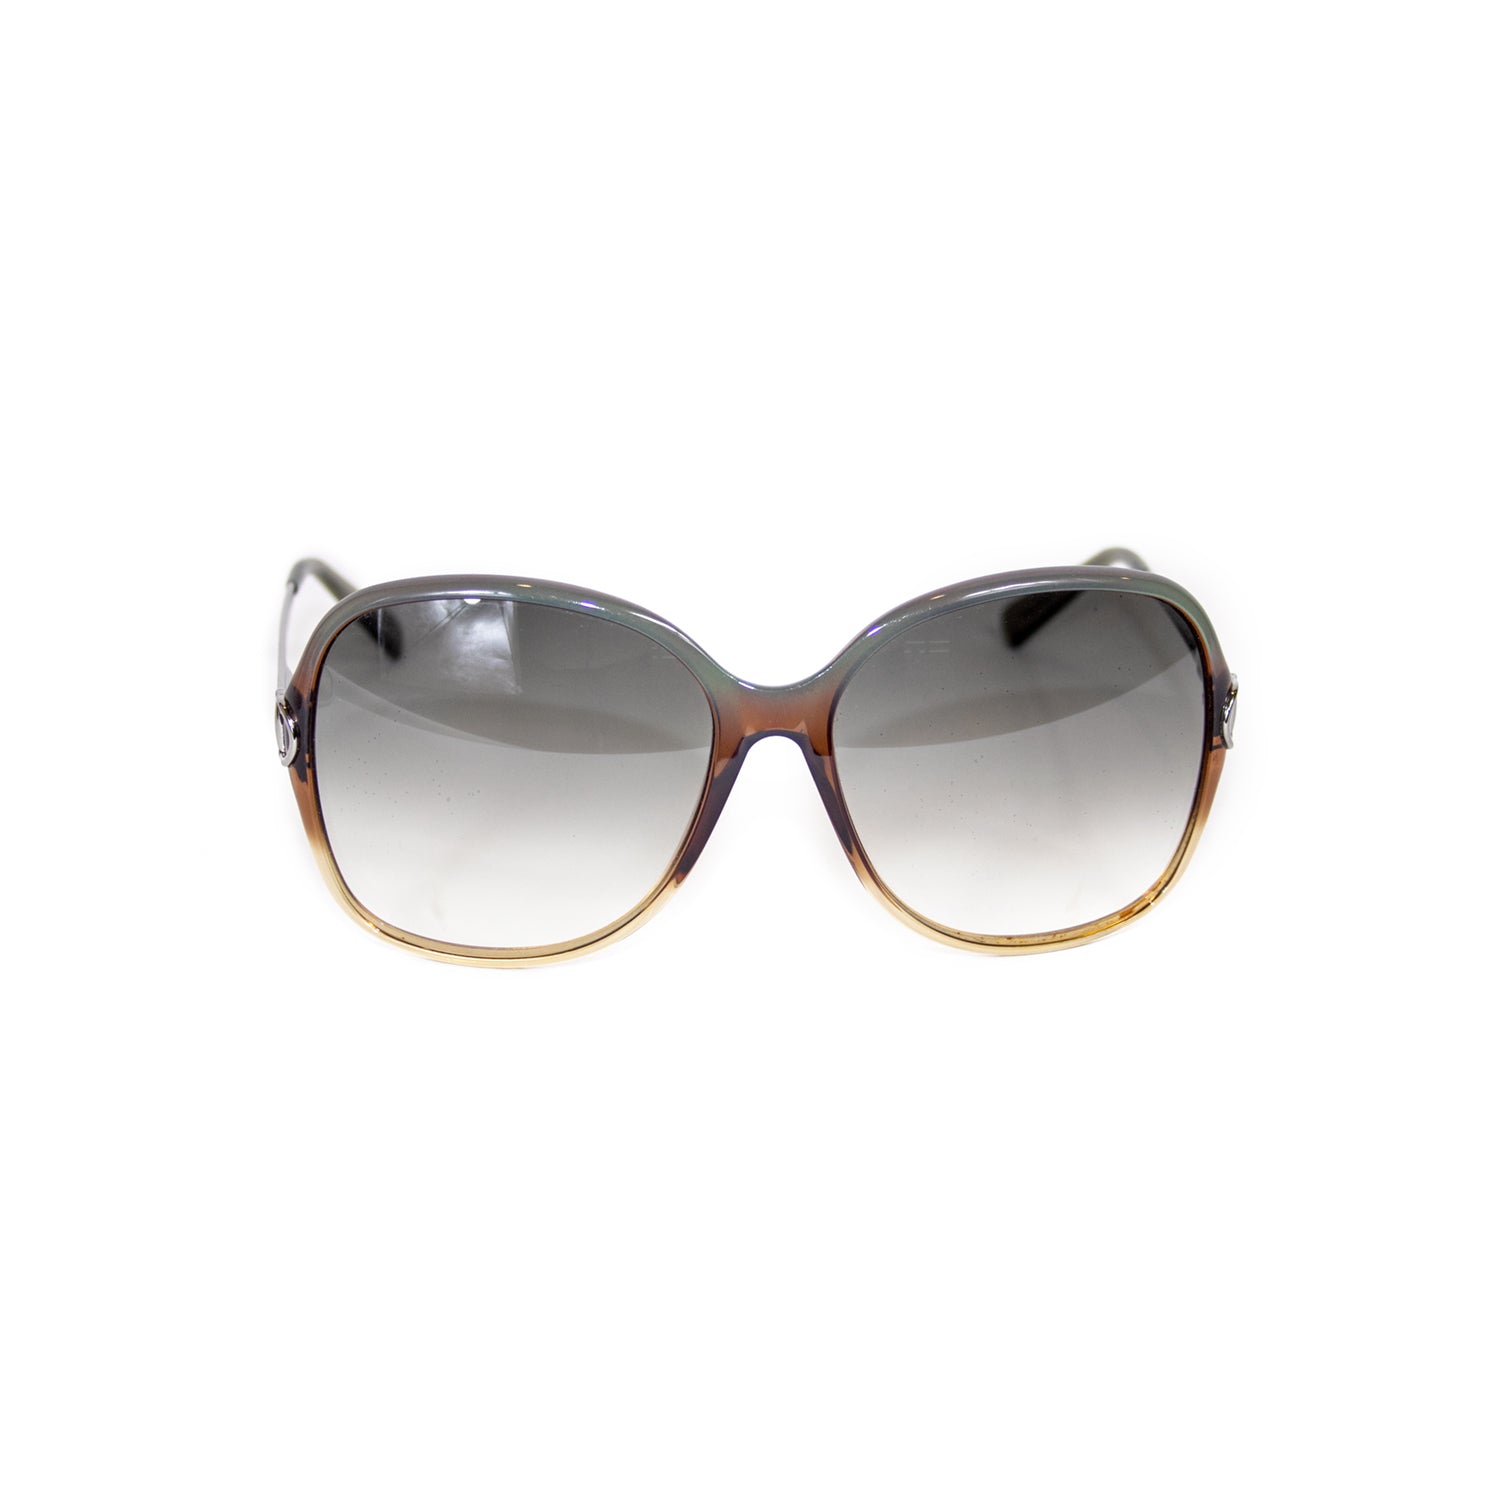 Gucci Green Brown Shaded Sunglasses